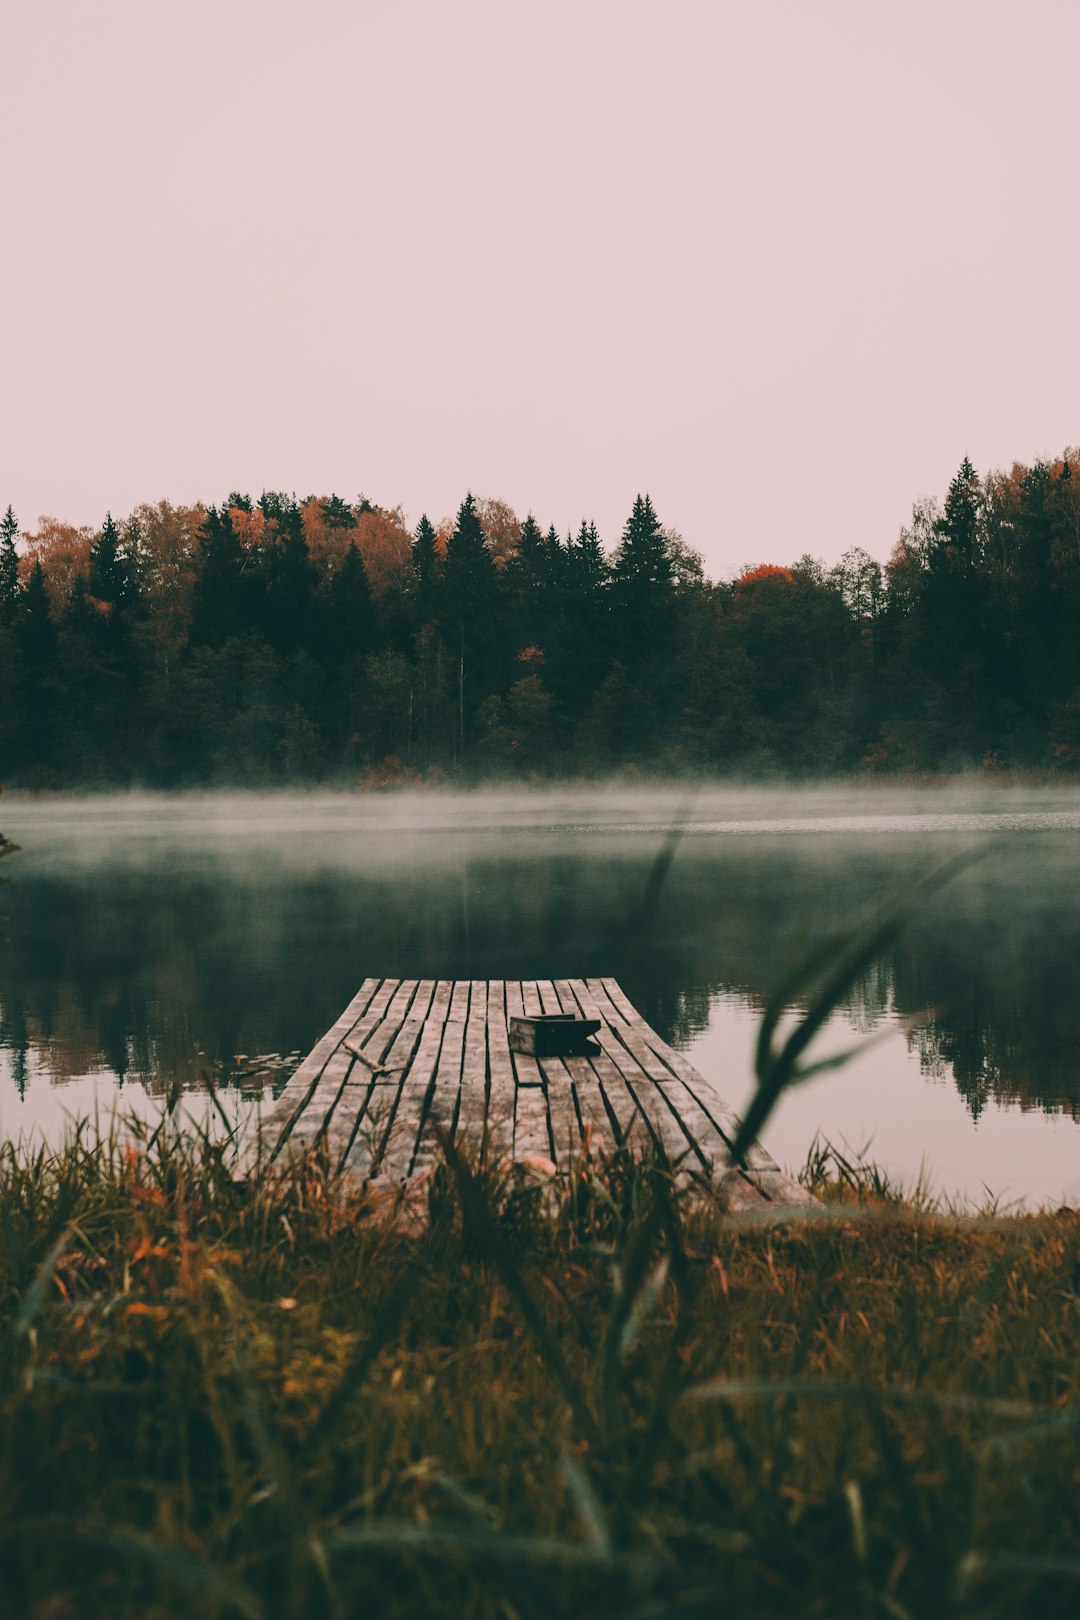 brown wooden dock on calm body of water